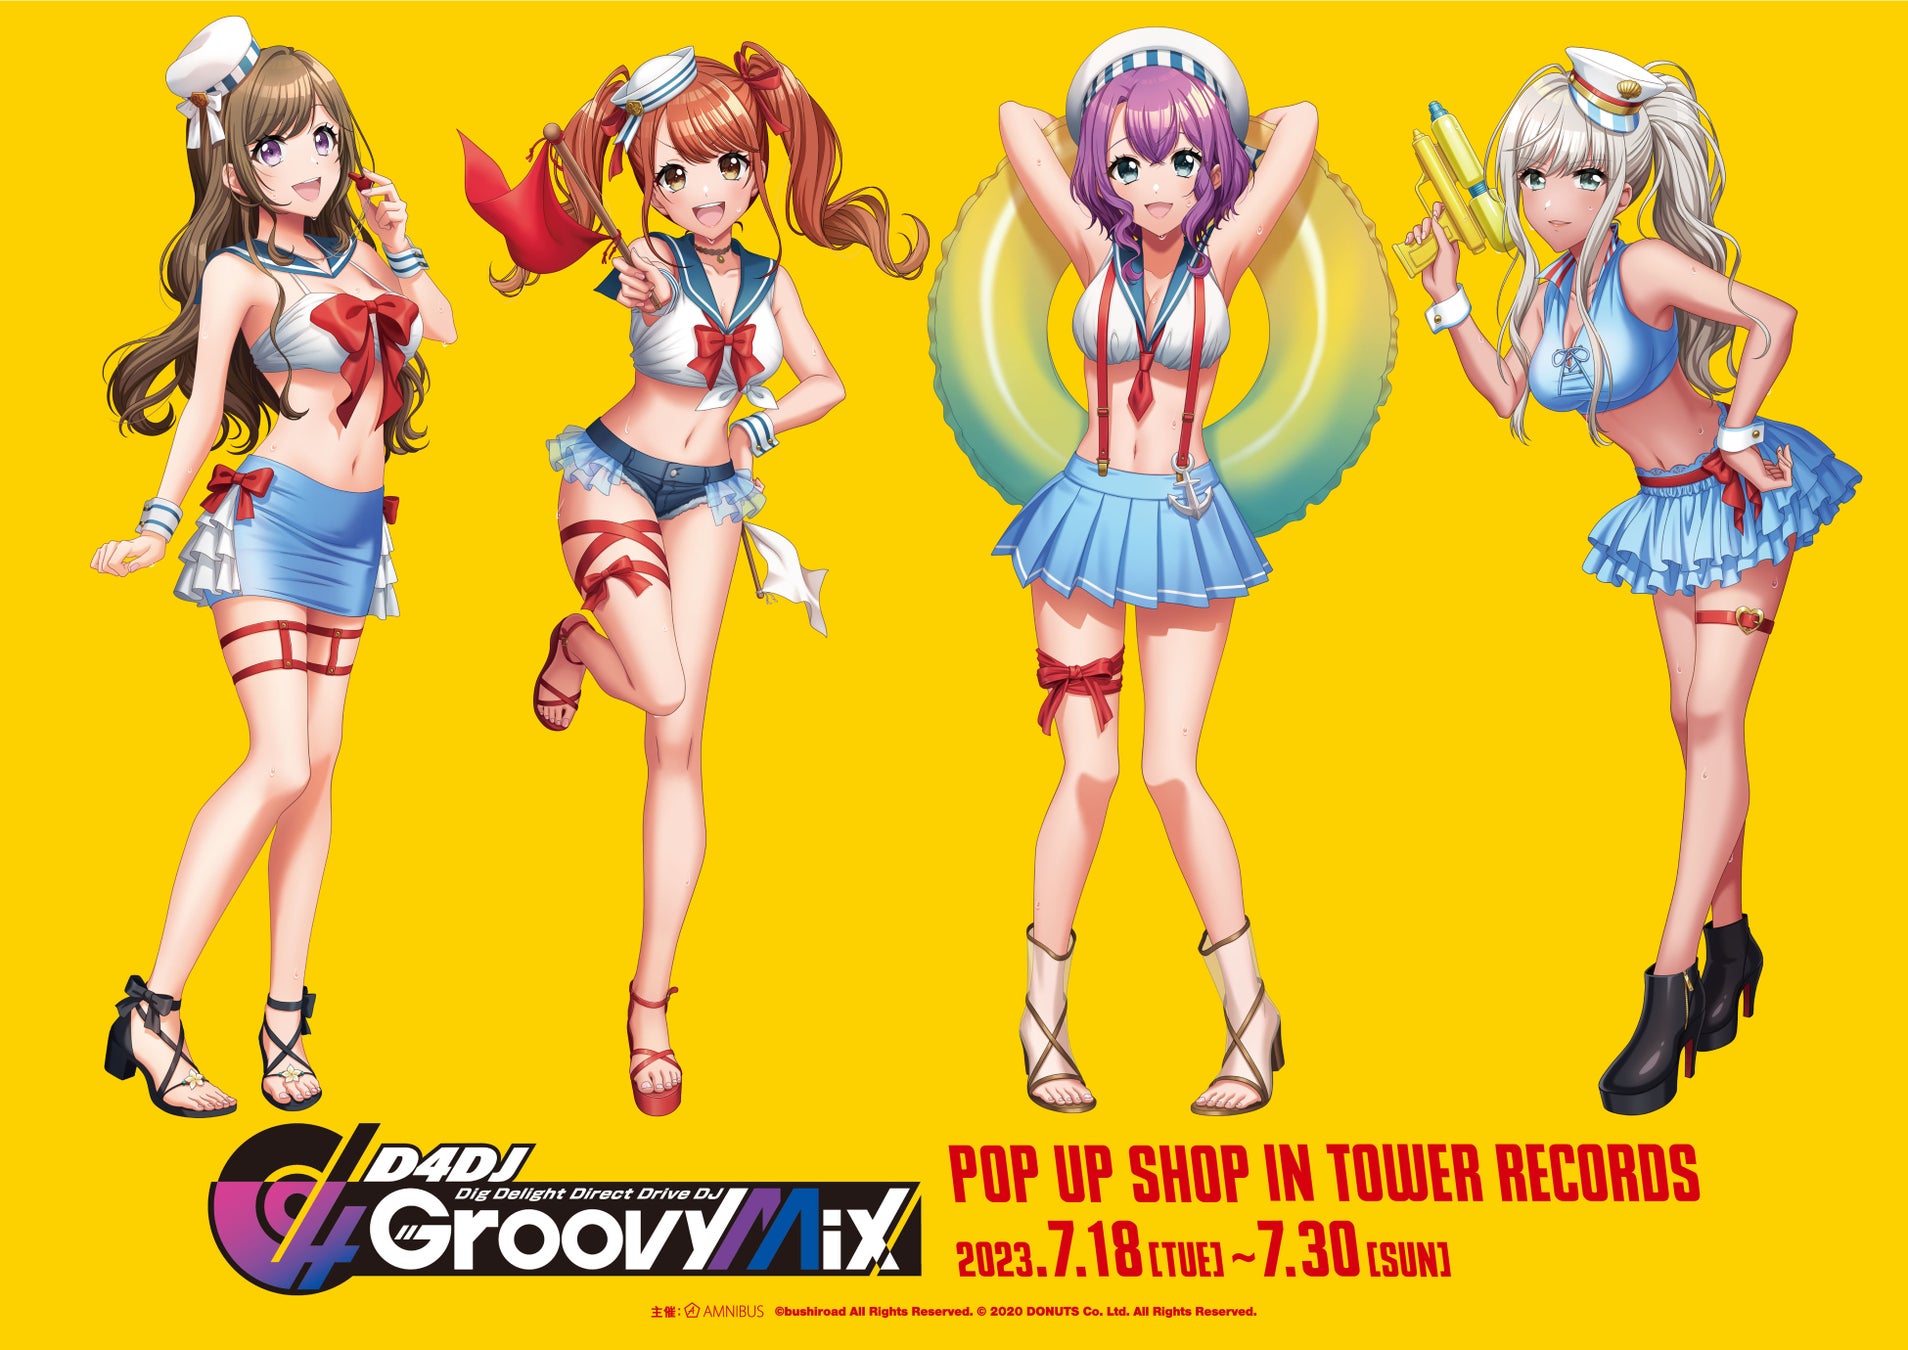 『D4DJ Groovy Mix』のイベント「D4DJ Groovy Mix POP UP SHOP in TOWER RECORDS」の開催が決定！